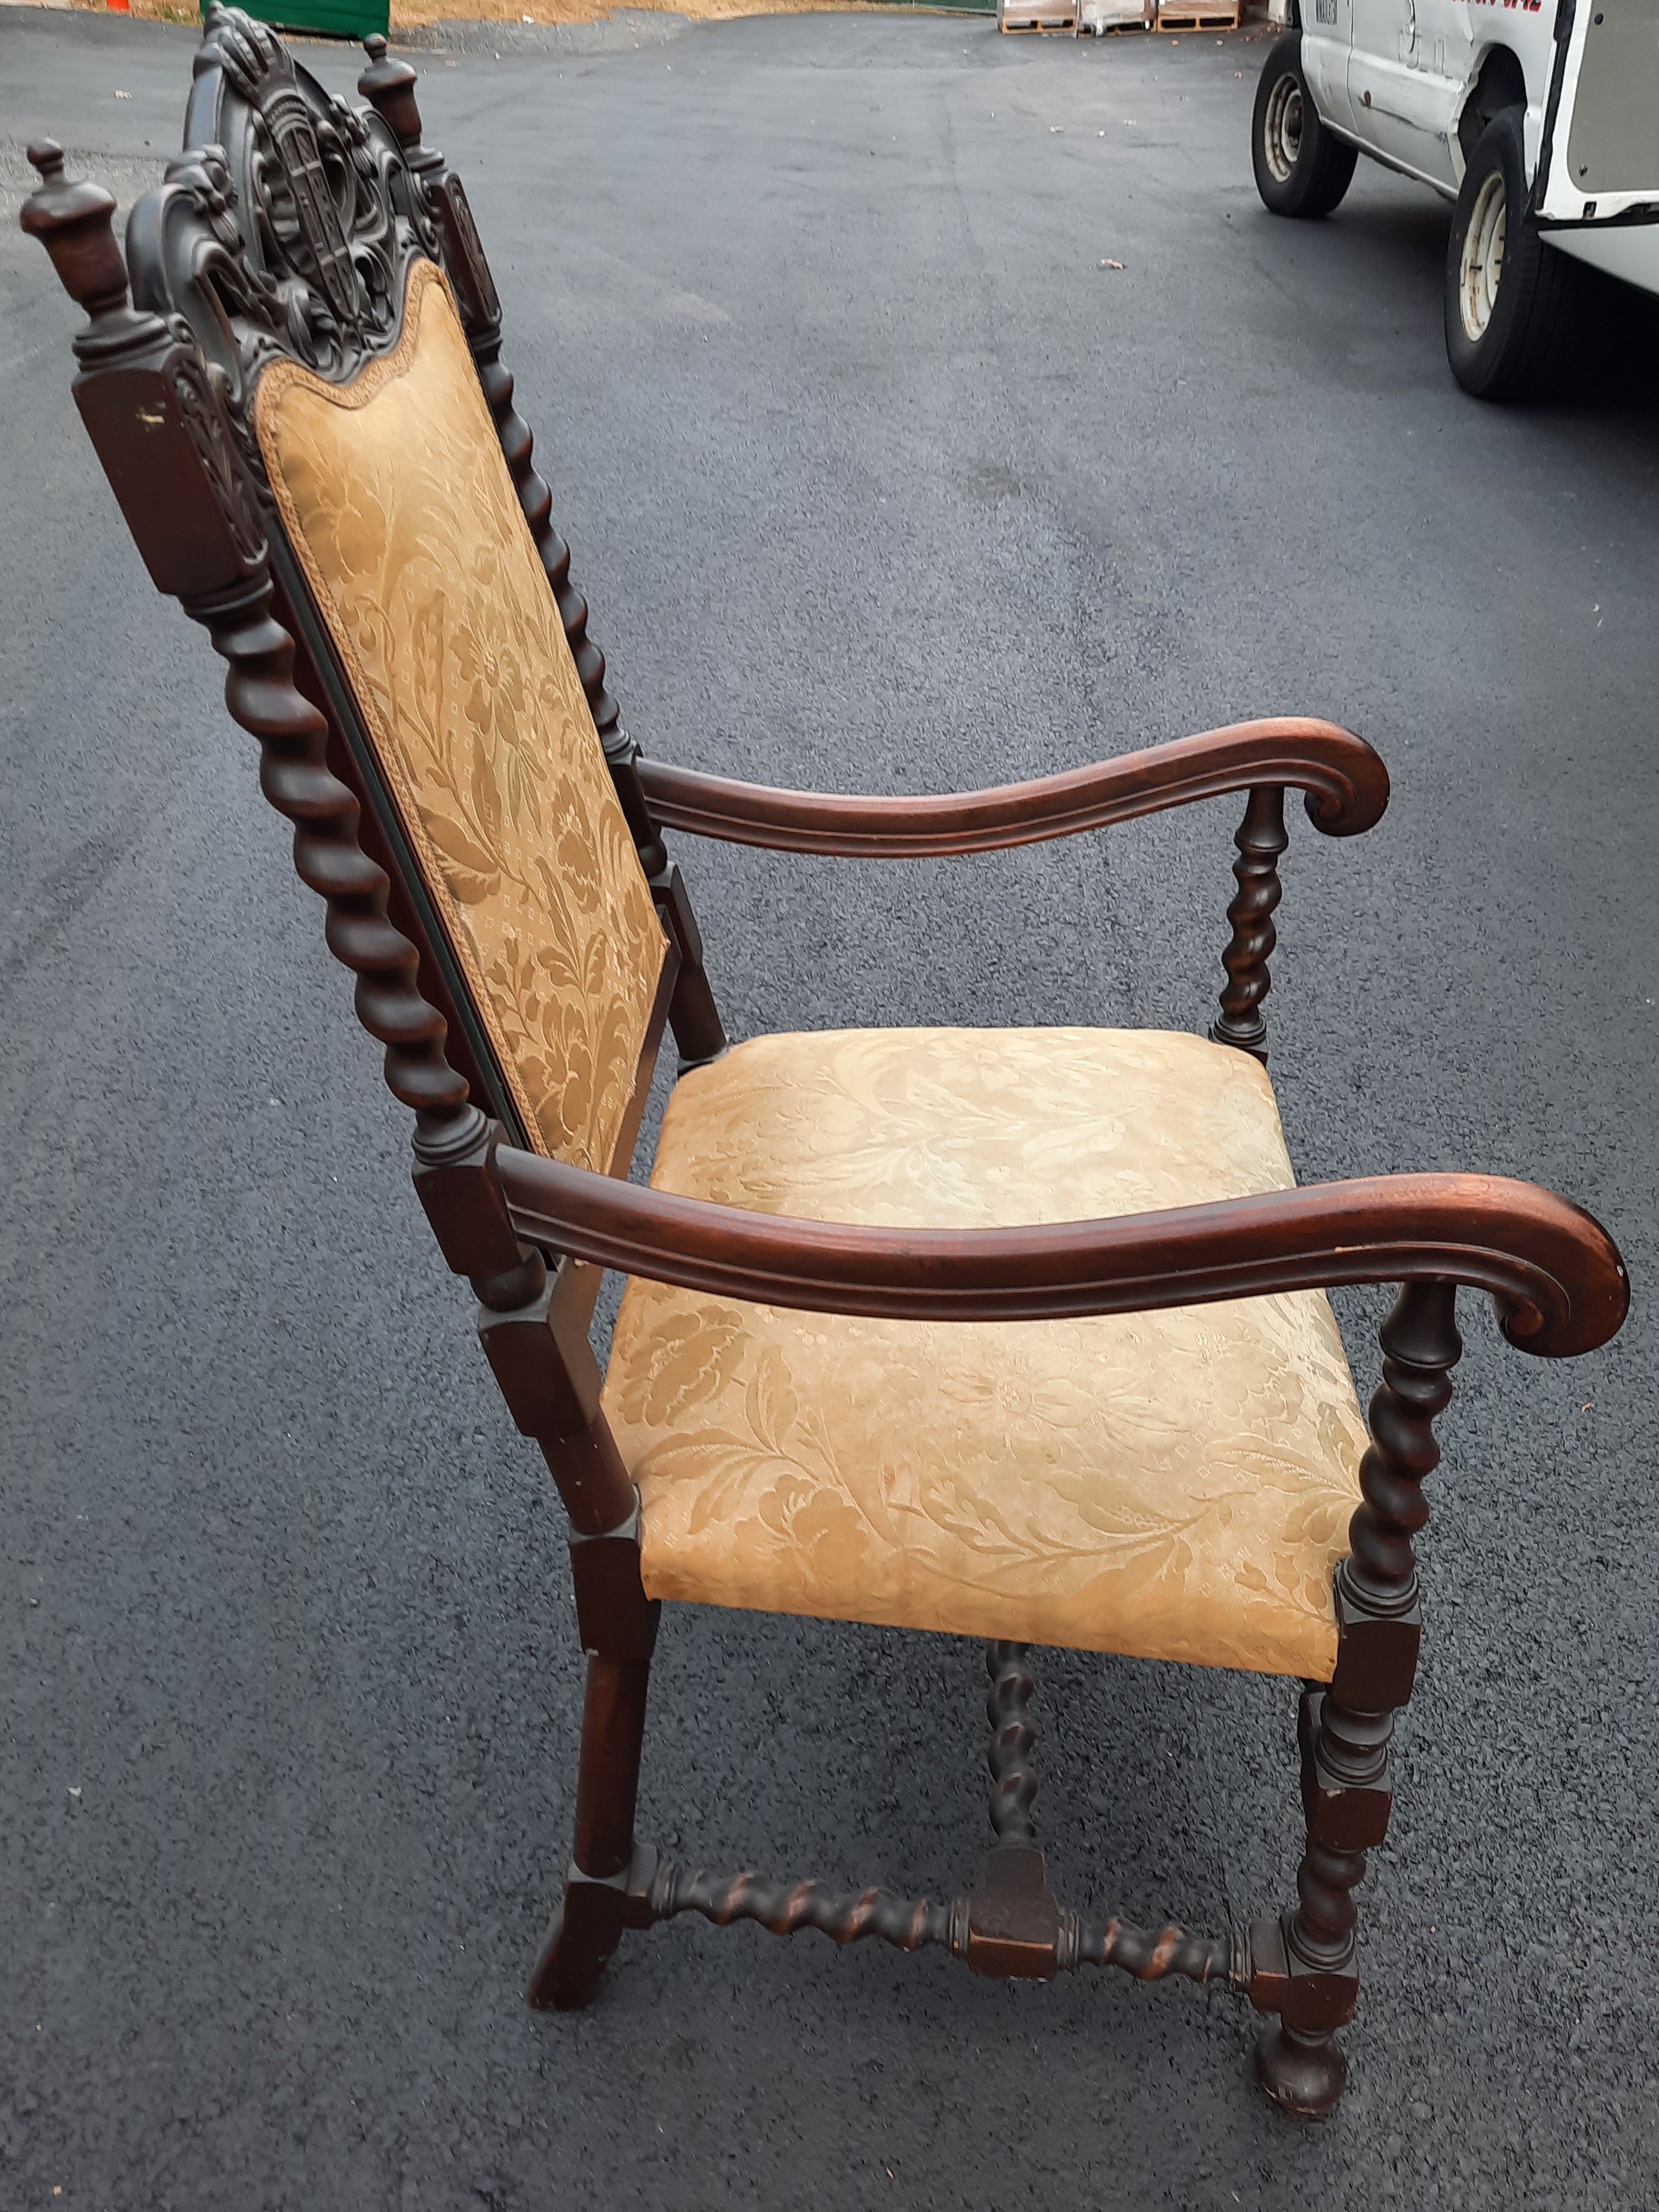 1800s chairs